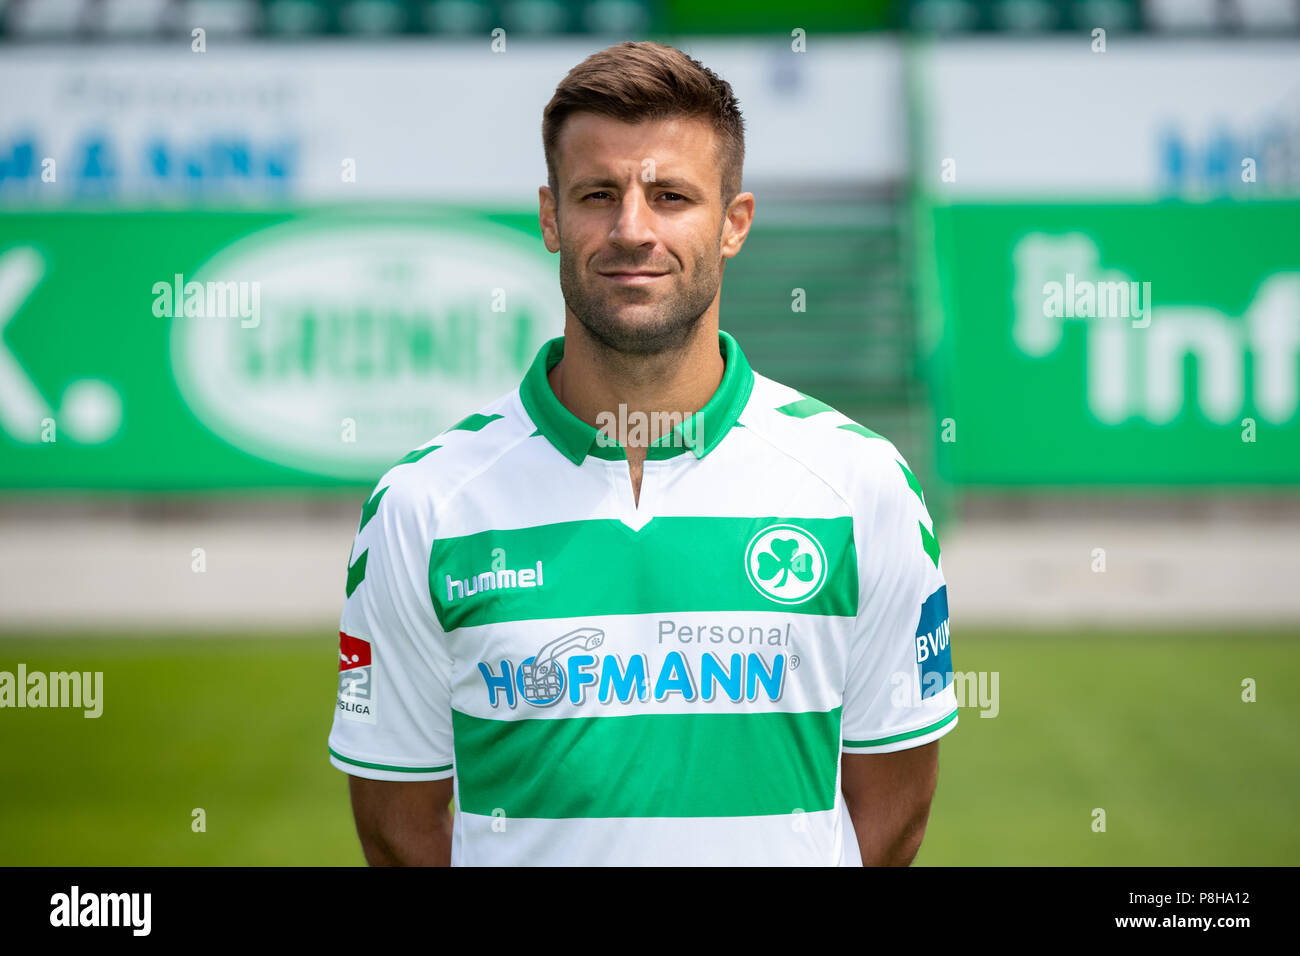 Fuerth, Germany. 11th July, 2018. Photo session with SpVgg Greuther Fuerth, season 2018/19. SpVgg Greuther Fuerth player, Marco Caligiuri. Credit: Daniel Karmann/dpa - IMPORTANT NOTICE: Due to the German Football League·s (DFL) accreditation regulations, publication and redistribution online and in online media is limited during the match to fifteen images per match/dpa/Alamy Live News Stock Photo